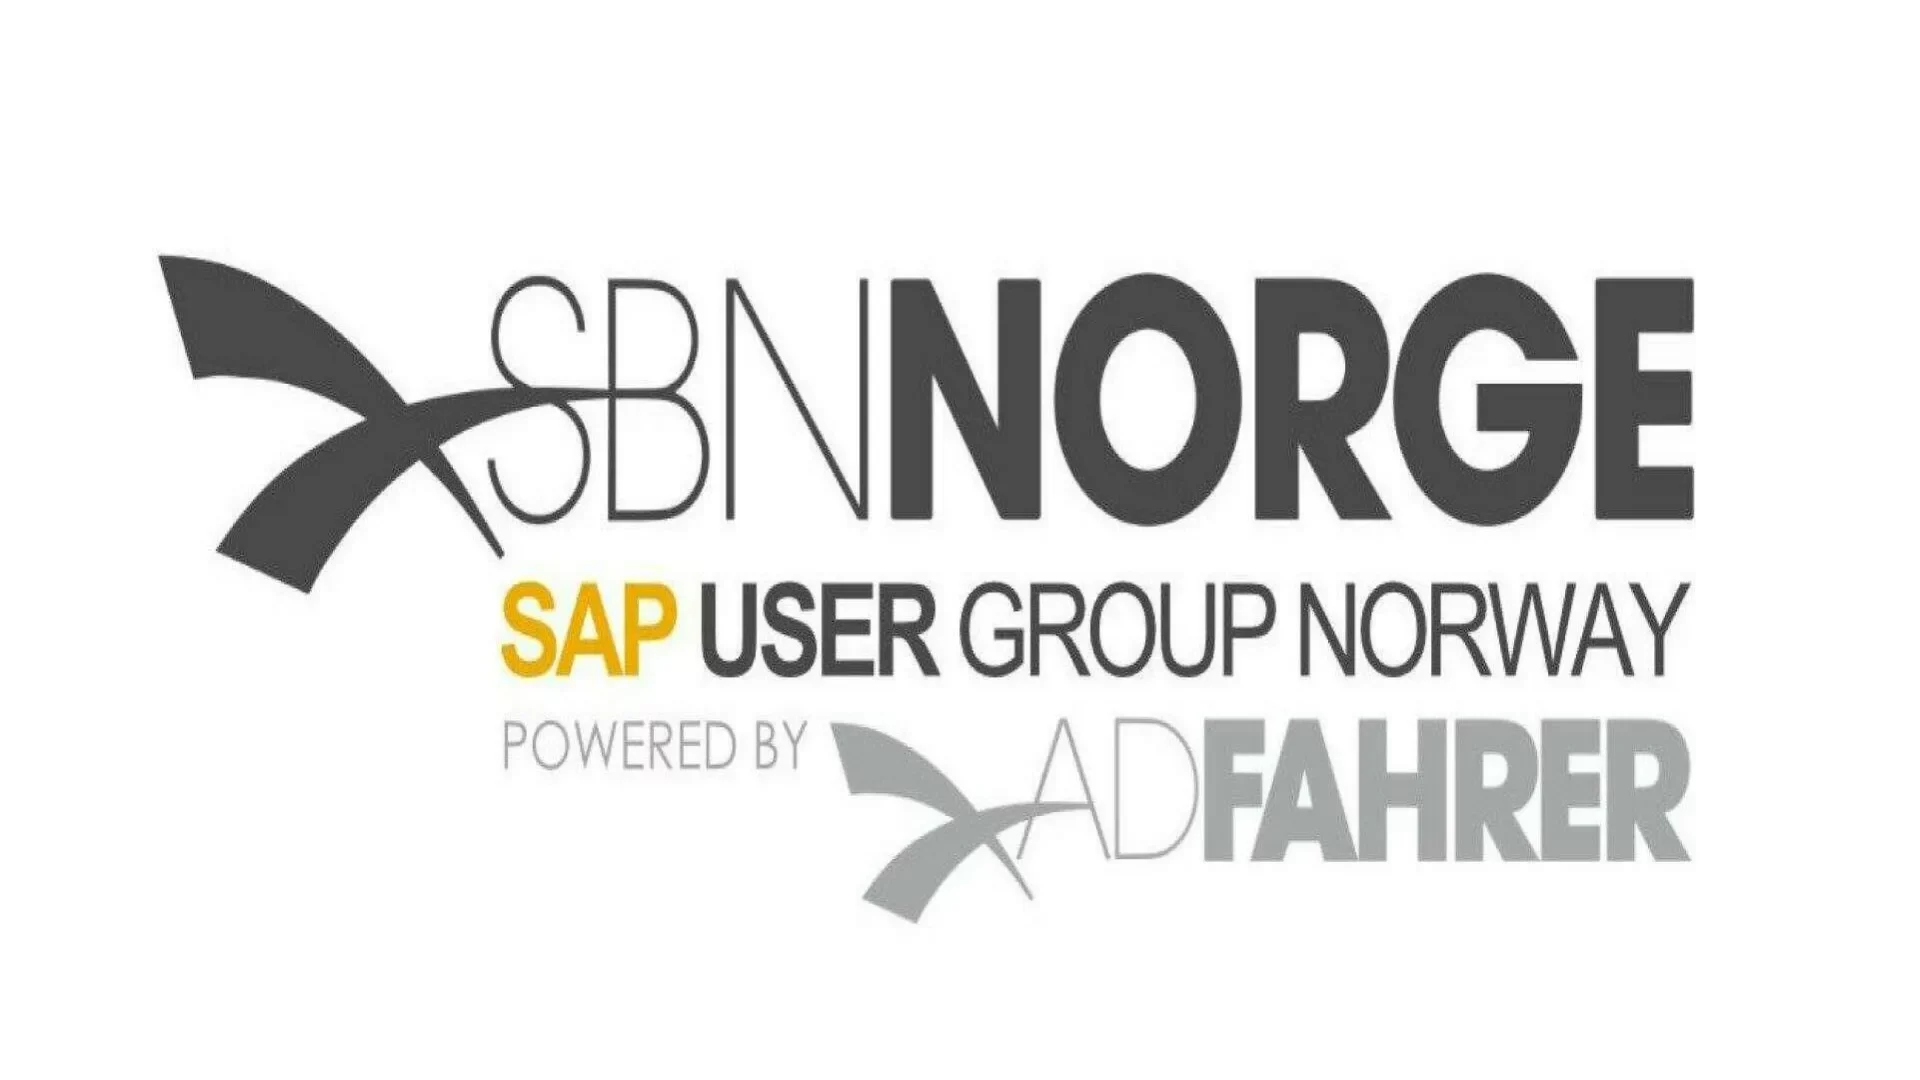 SBN NORGE SAP USER GROUP NORWAY